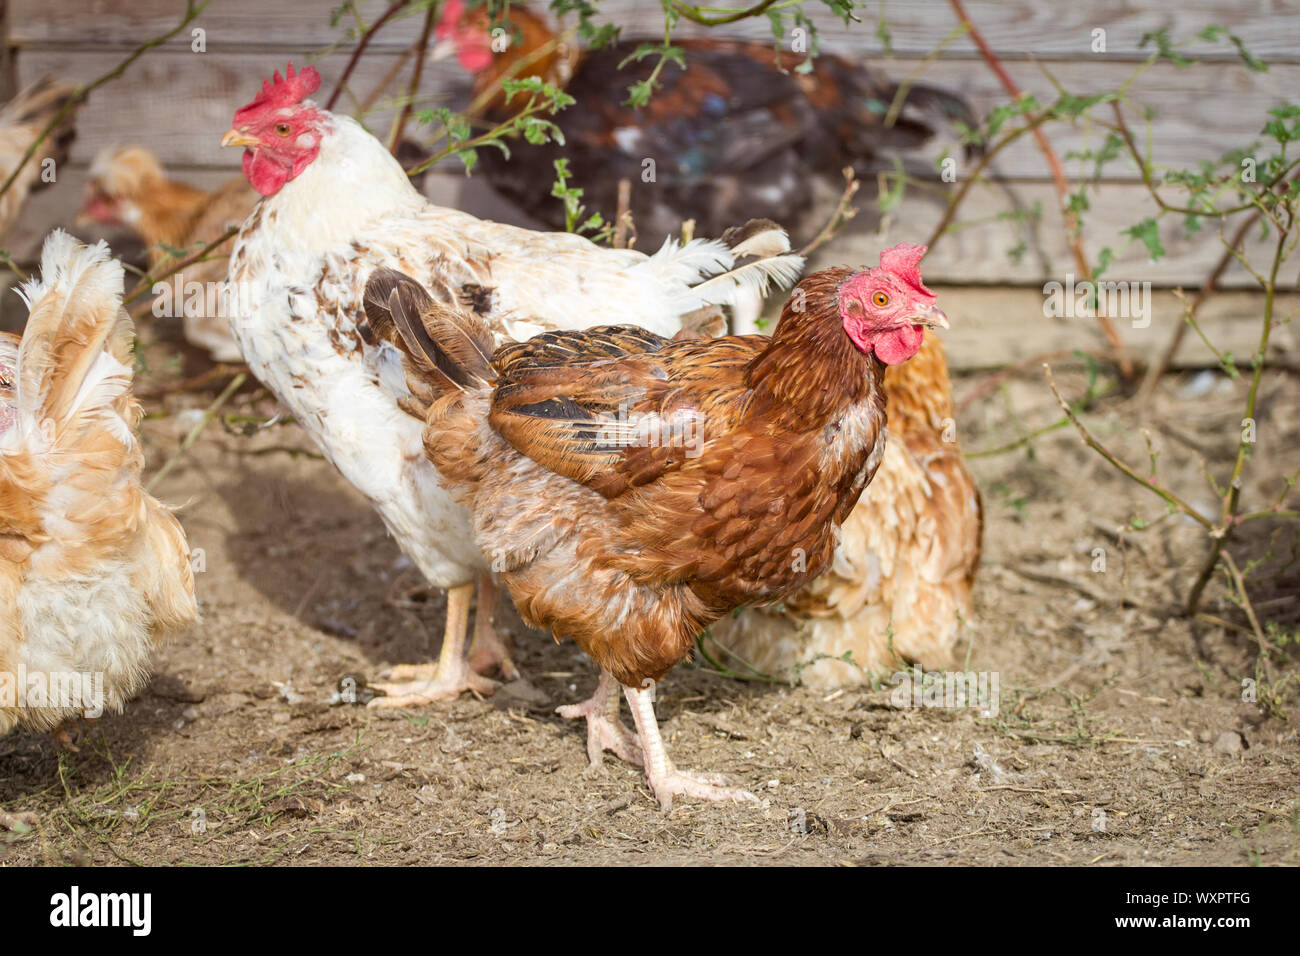 A group of free range chickens Stock Photo